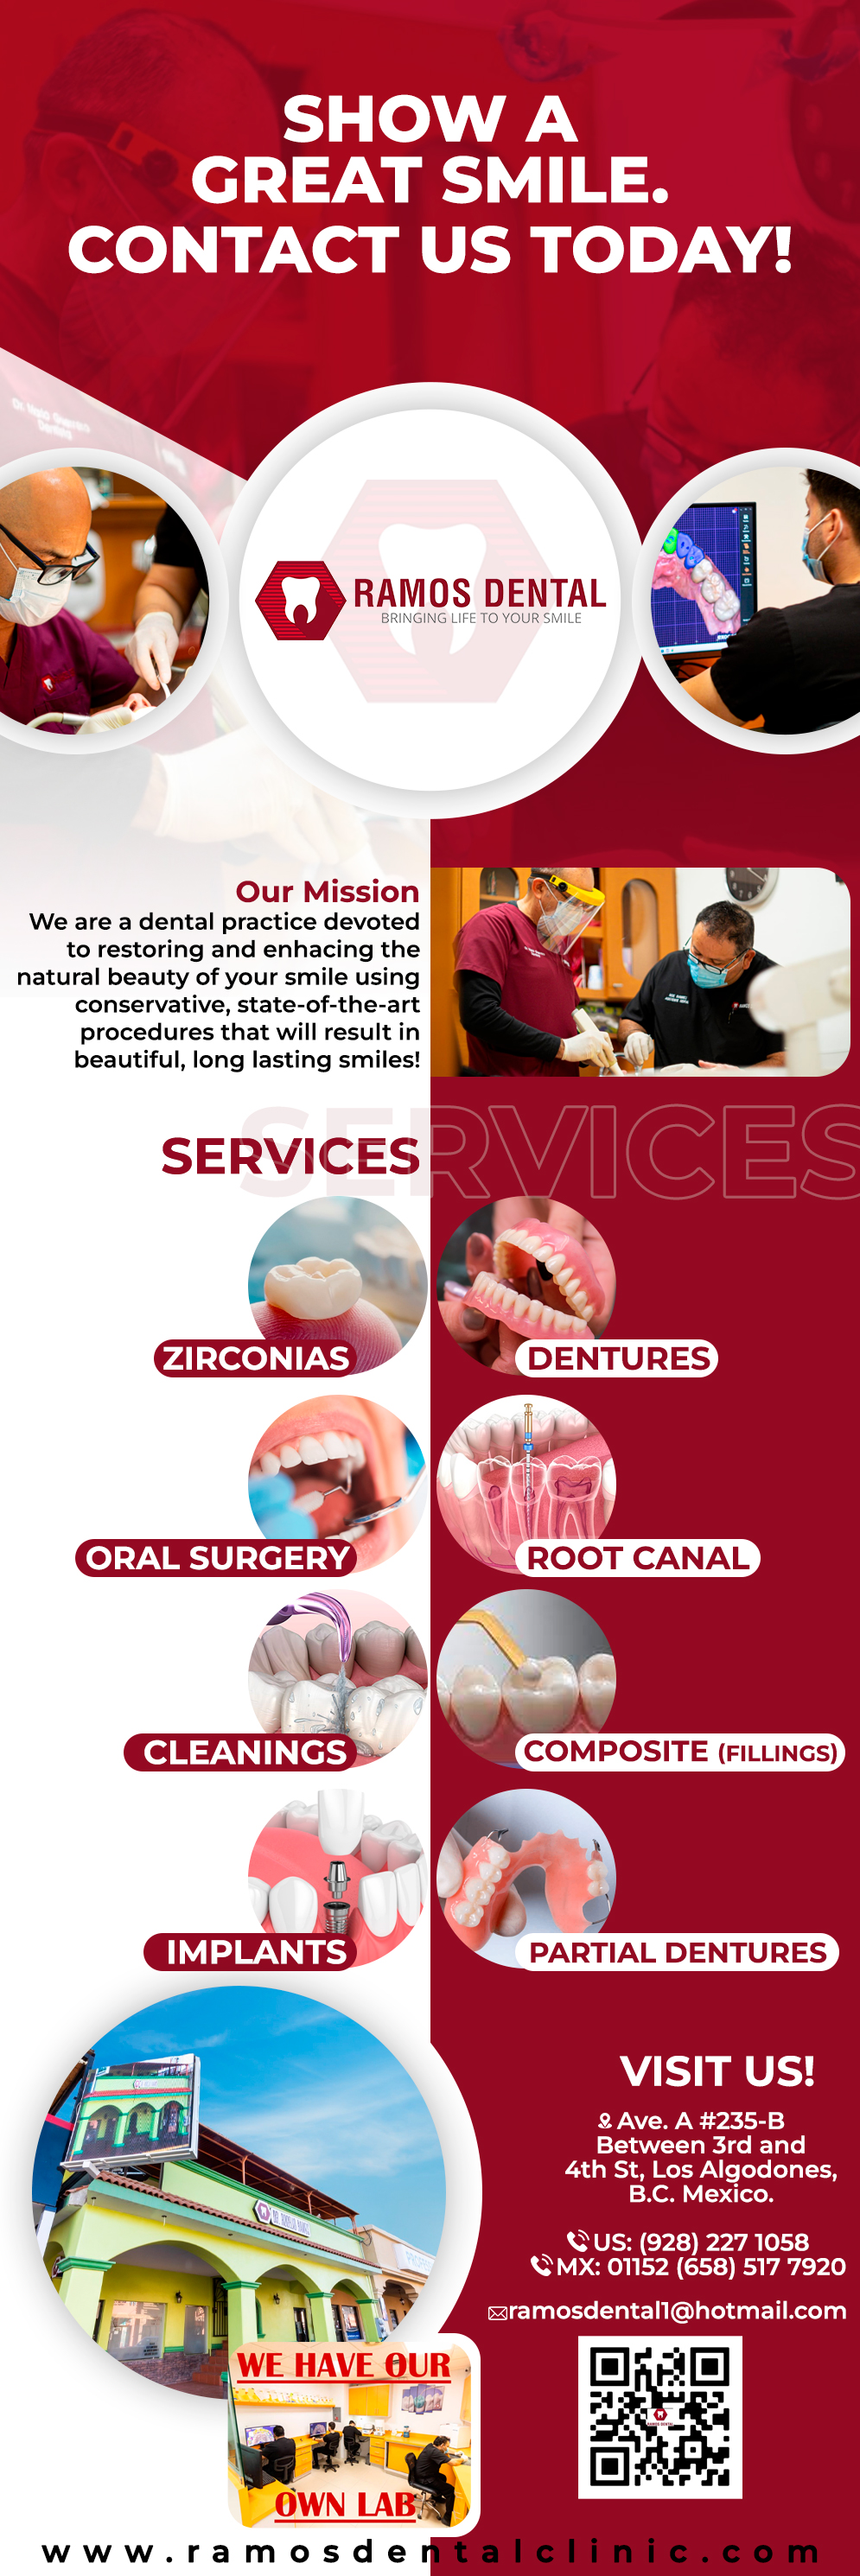 RAMOS DENTAL Dr. Rogelio Ramos DDS in Algodones  in Algodones  RAMOS DENTAL Where Quality is a Given. Services:               
• Cosmetic Dentistry                   
• Oral Surgery                         • Dental Implants                         • Extractions
• Dentures                               •  Partial Dentures                       •  Crowns                               • Fillings                                      • Cleanings
      • Endodontics (root canal)  
• Gum Disease   
                                            DENTISTA DENTIST DENTAL CLINIC DENTAL   Implant Dentistry                   Cosmetic Dentistry                   
Oral Surgery                          Dental Implants                         Extractions Dentures                                 Partial Dentures                        Crowns                                  Fillings                                       Cleanings
      Endodontics (root canal)                          dr ramos dr. ramos rogelio ramos ramosdental                            